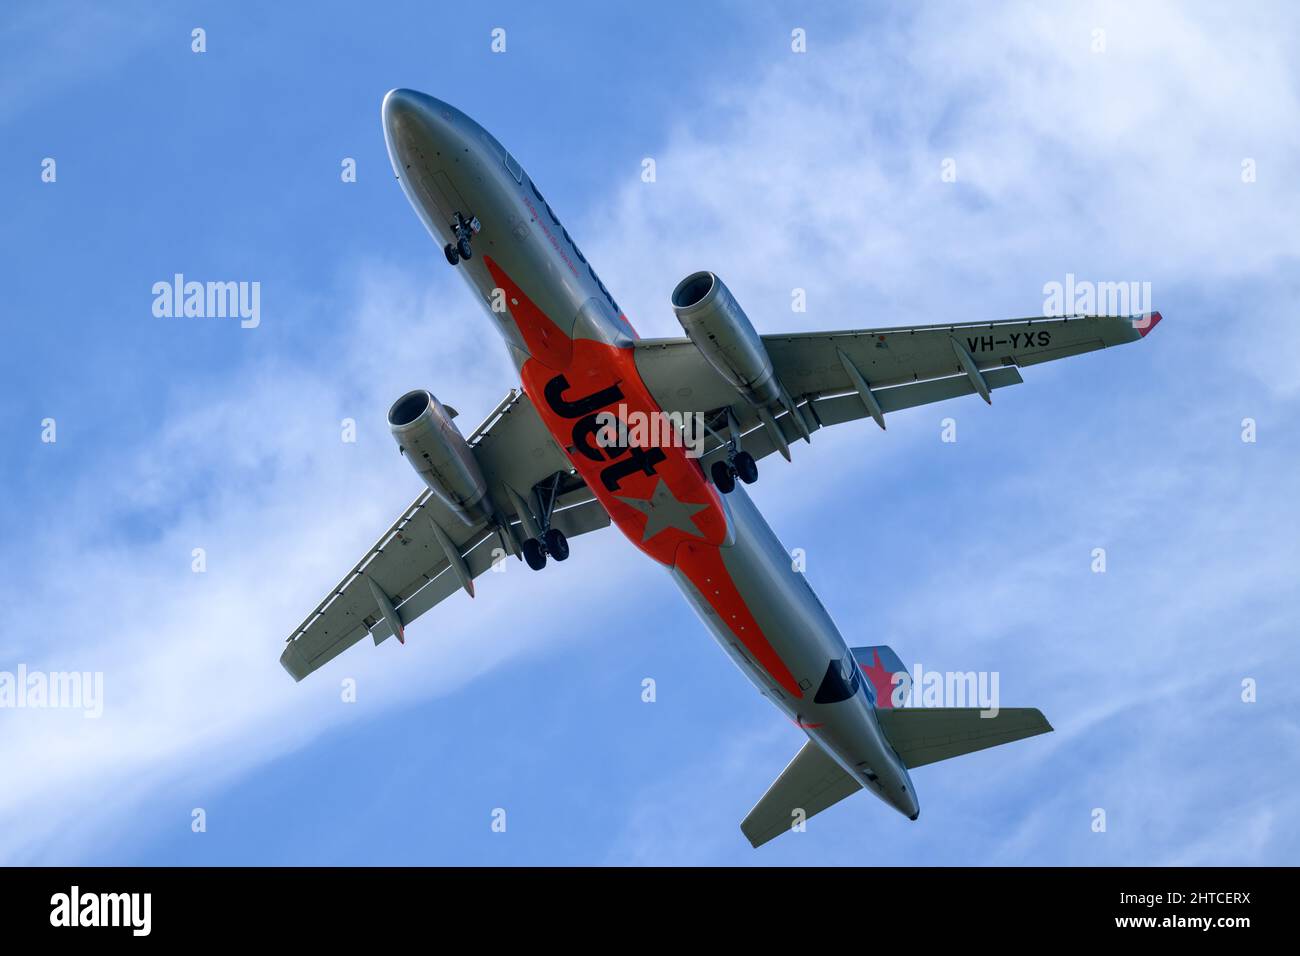 Jetstar Airlines Airbus A320 arriving at Sydney Airport Stock Photo